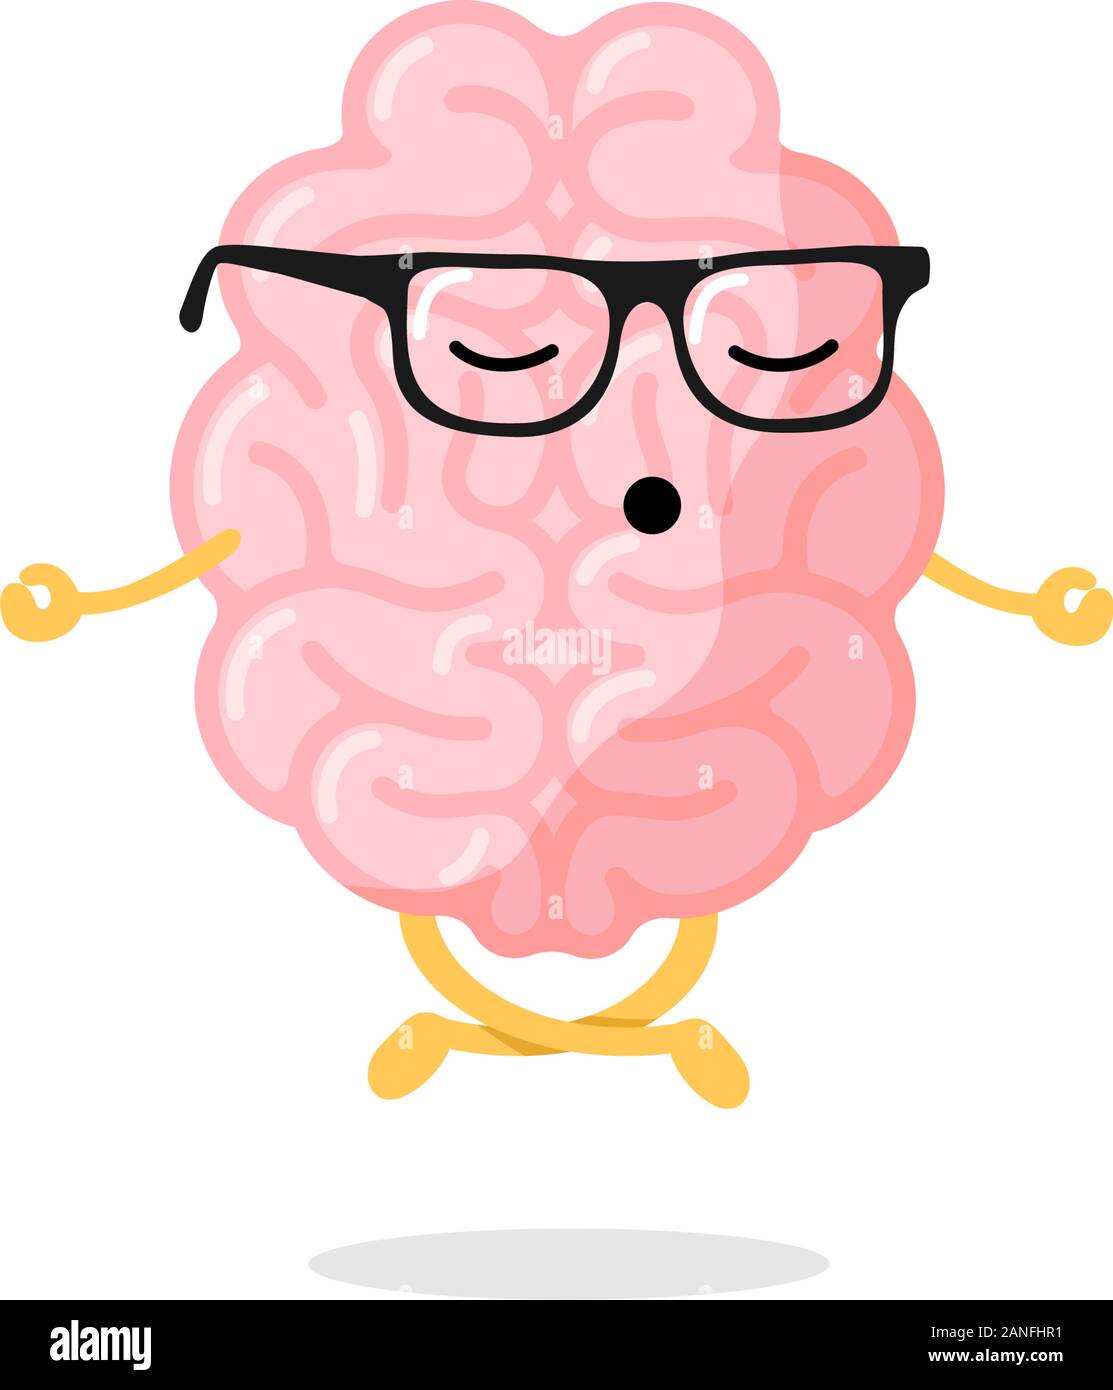 Cute cartoon smart human brain character with glasses relaxation meditate concept. Central nervous system organ meditation in lotus yoga pose. Funny relax concept vector illustration Stock Vector